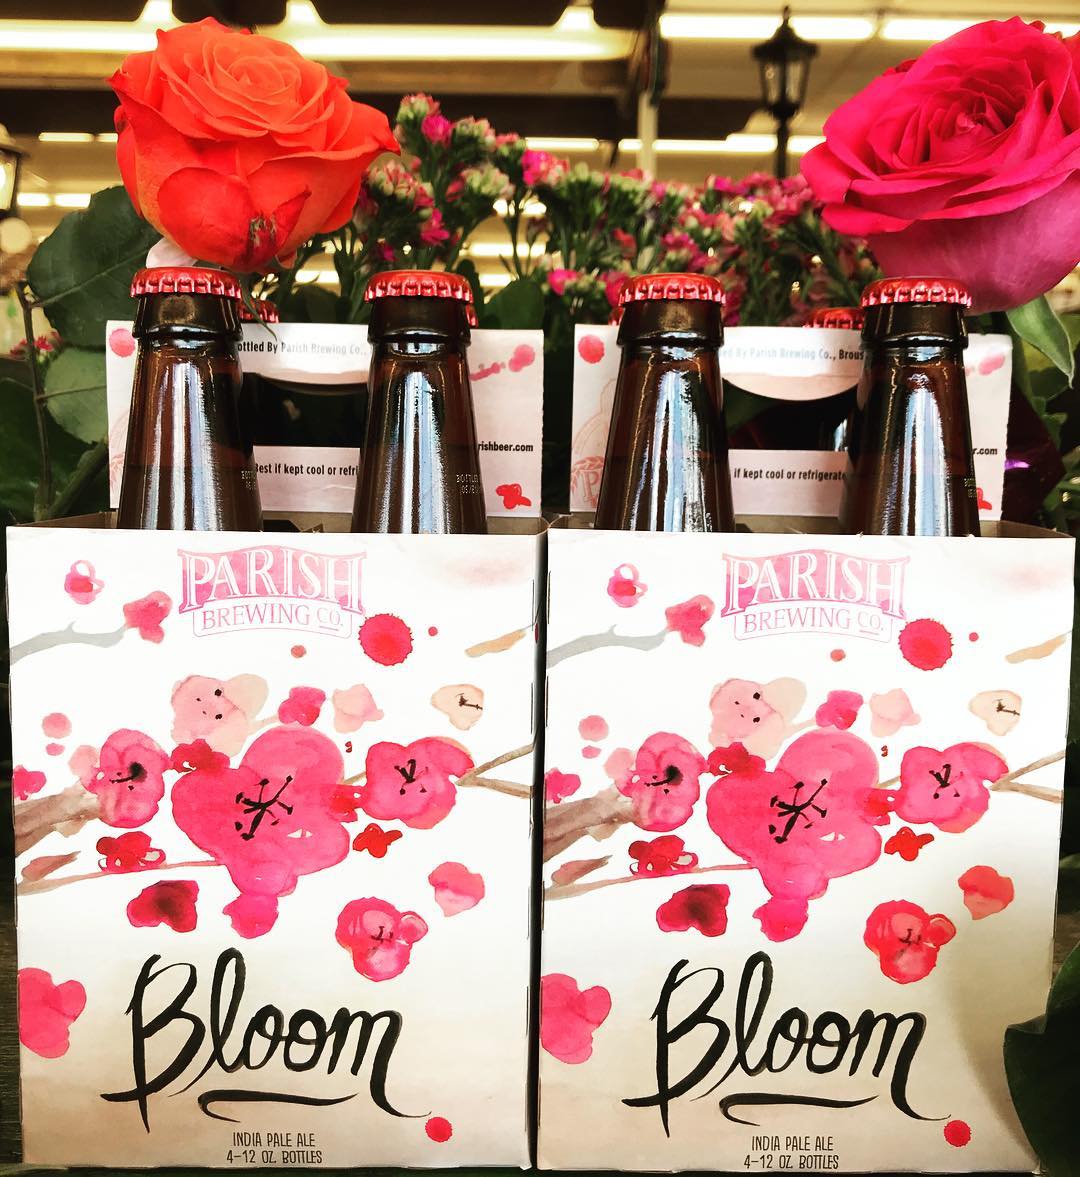 @parishbrewingco #Bloom is available now at our Mid-City location! Perfect for the hottest Louisiana weather….